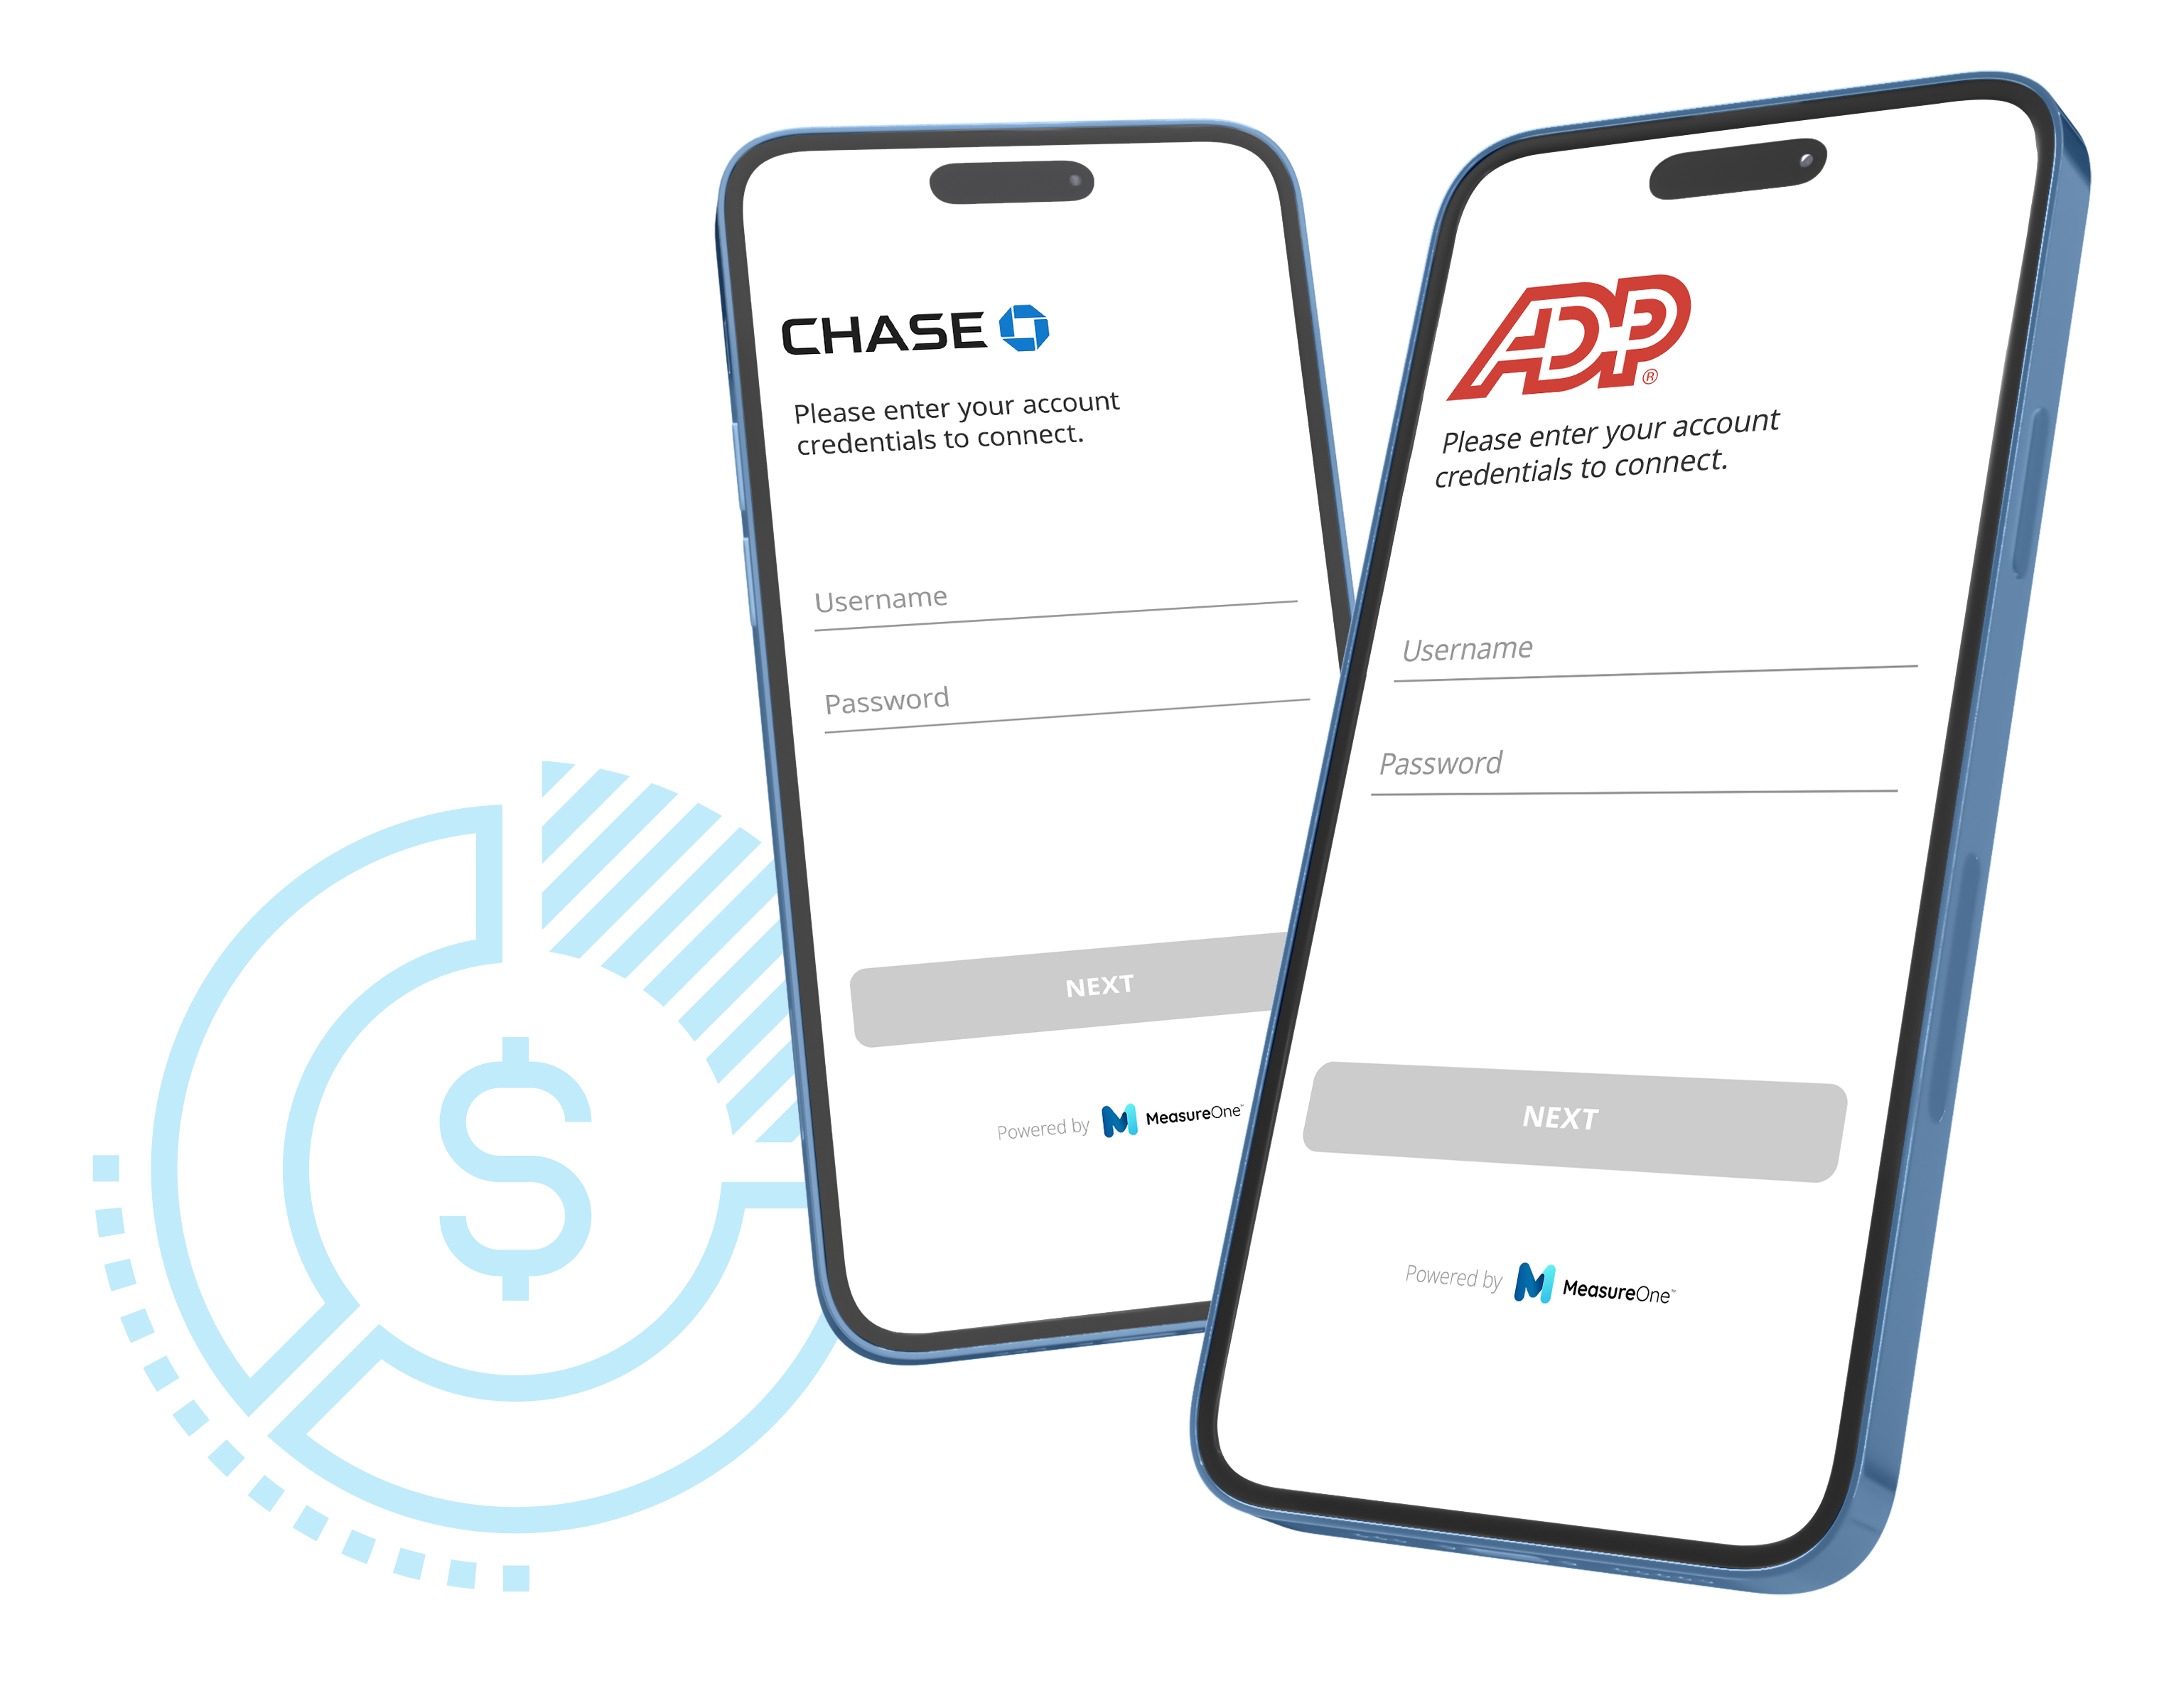 2phones_Insurance_Chase_ADP